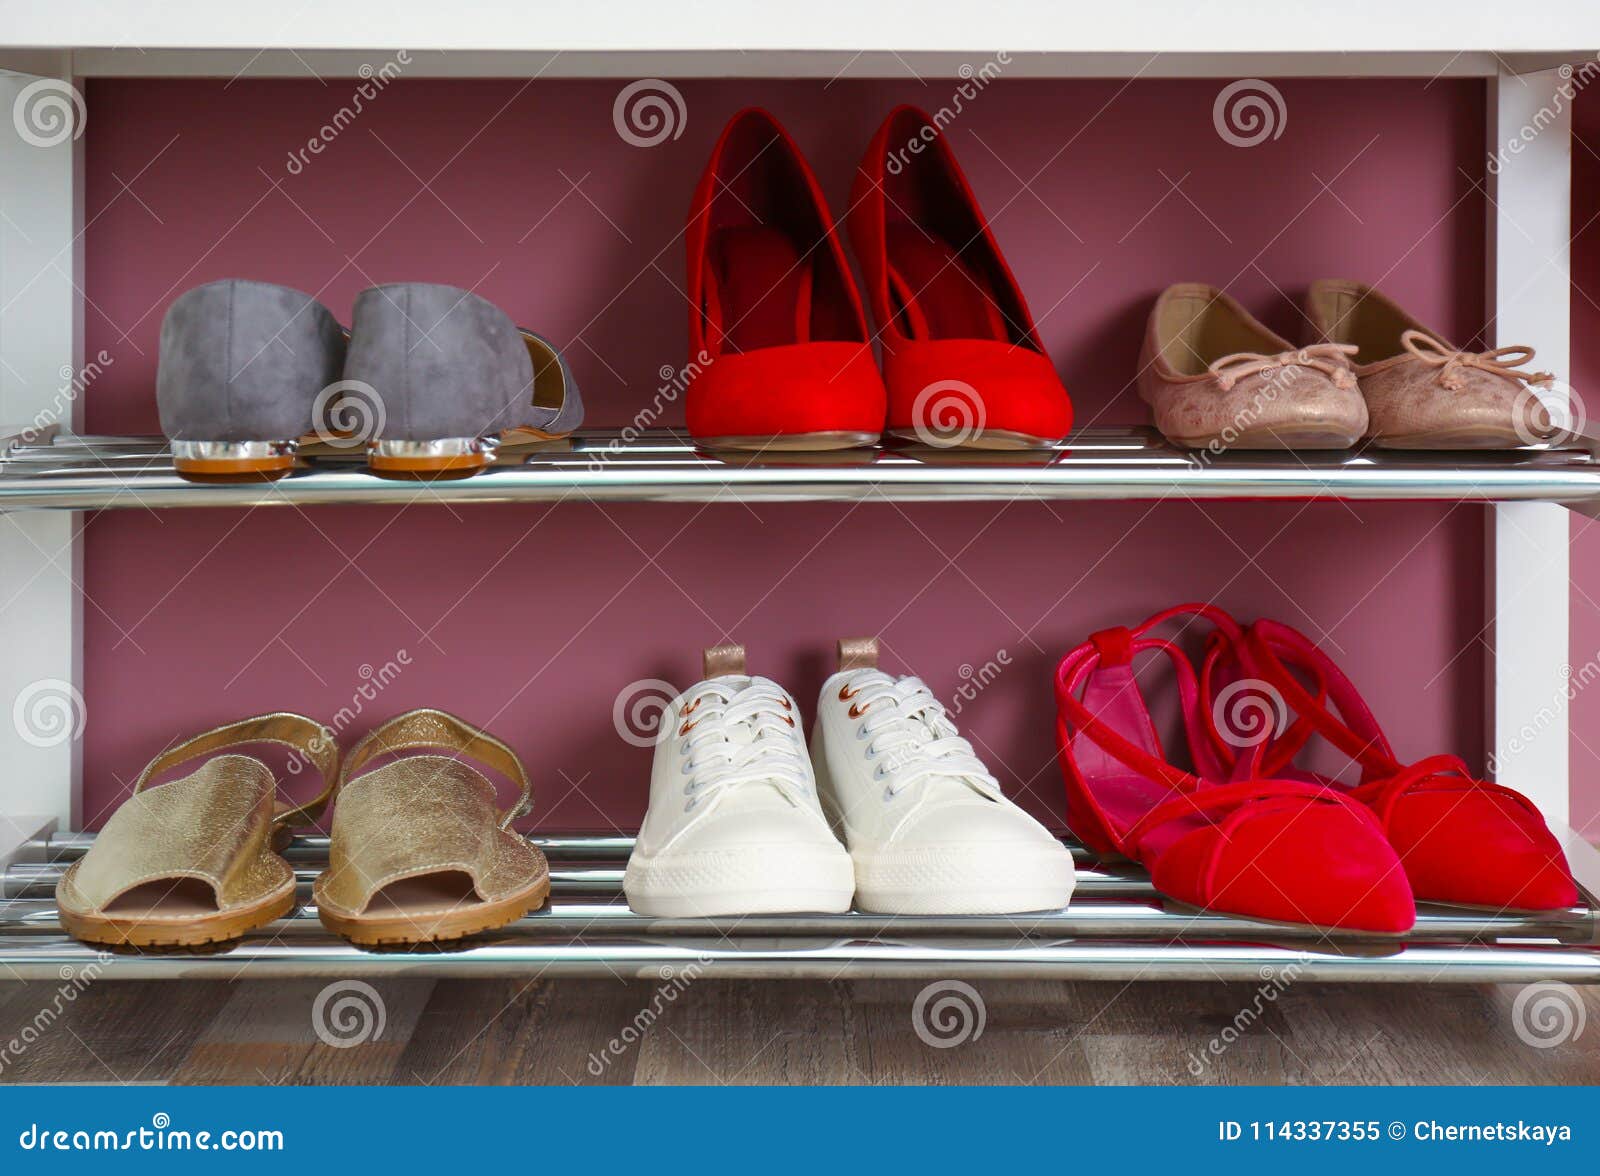 Collection of Stylish Shoes on Rack Storage Near Wall Stock Image ...